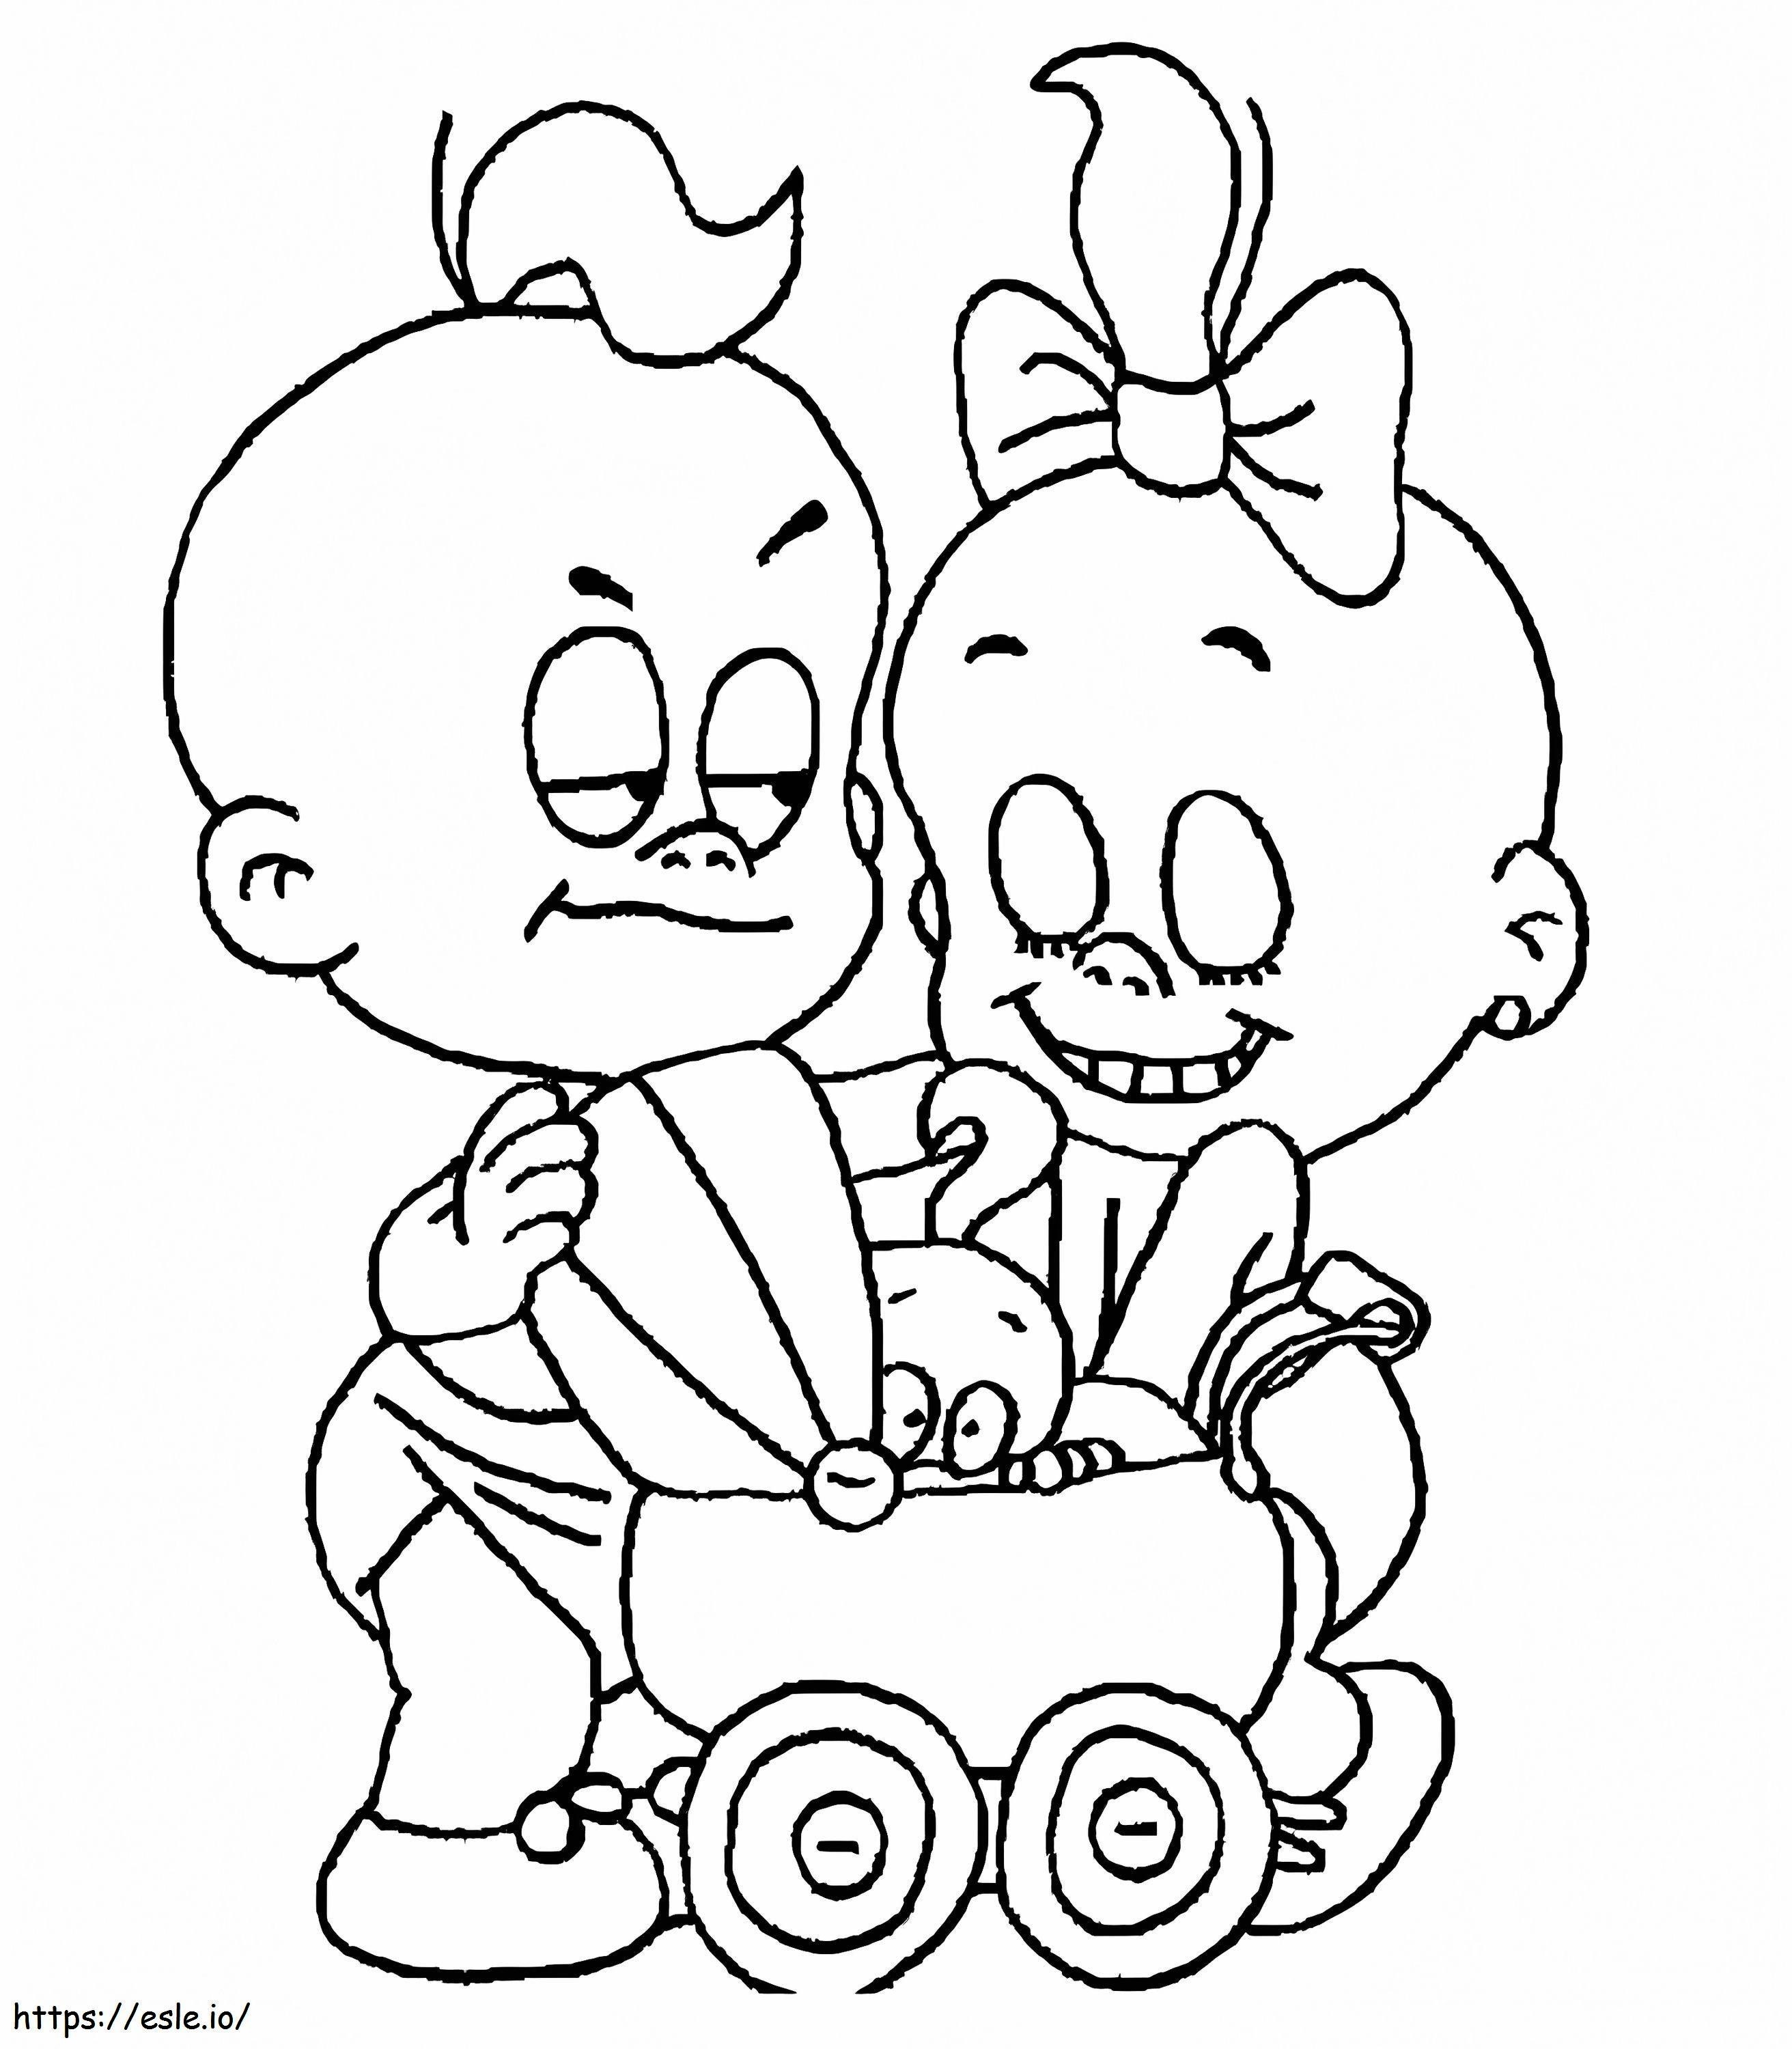 Winnie Diaper 5 coloring page